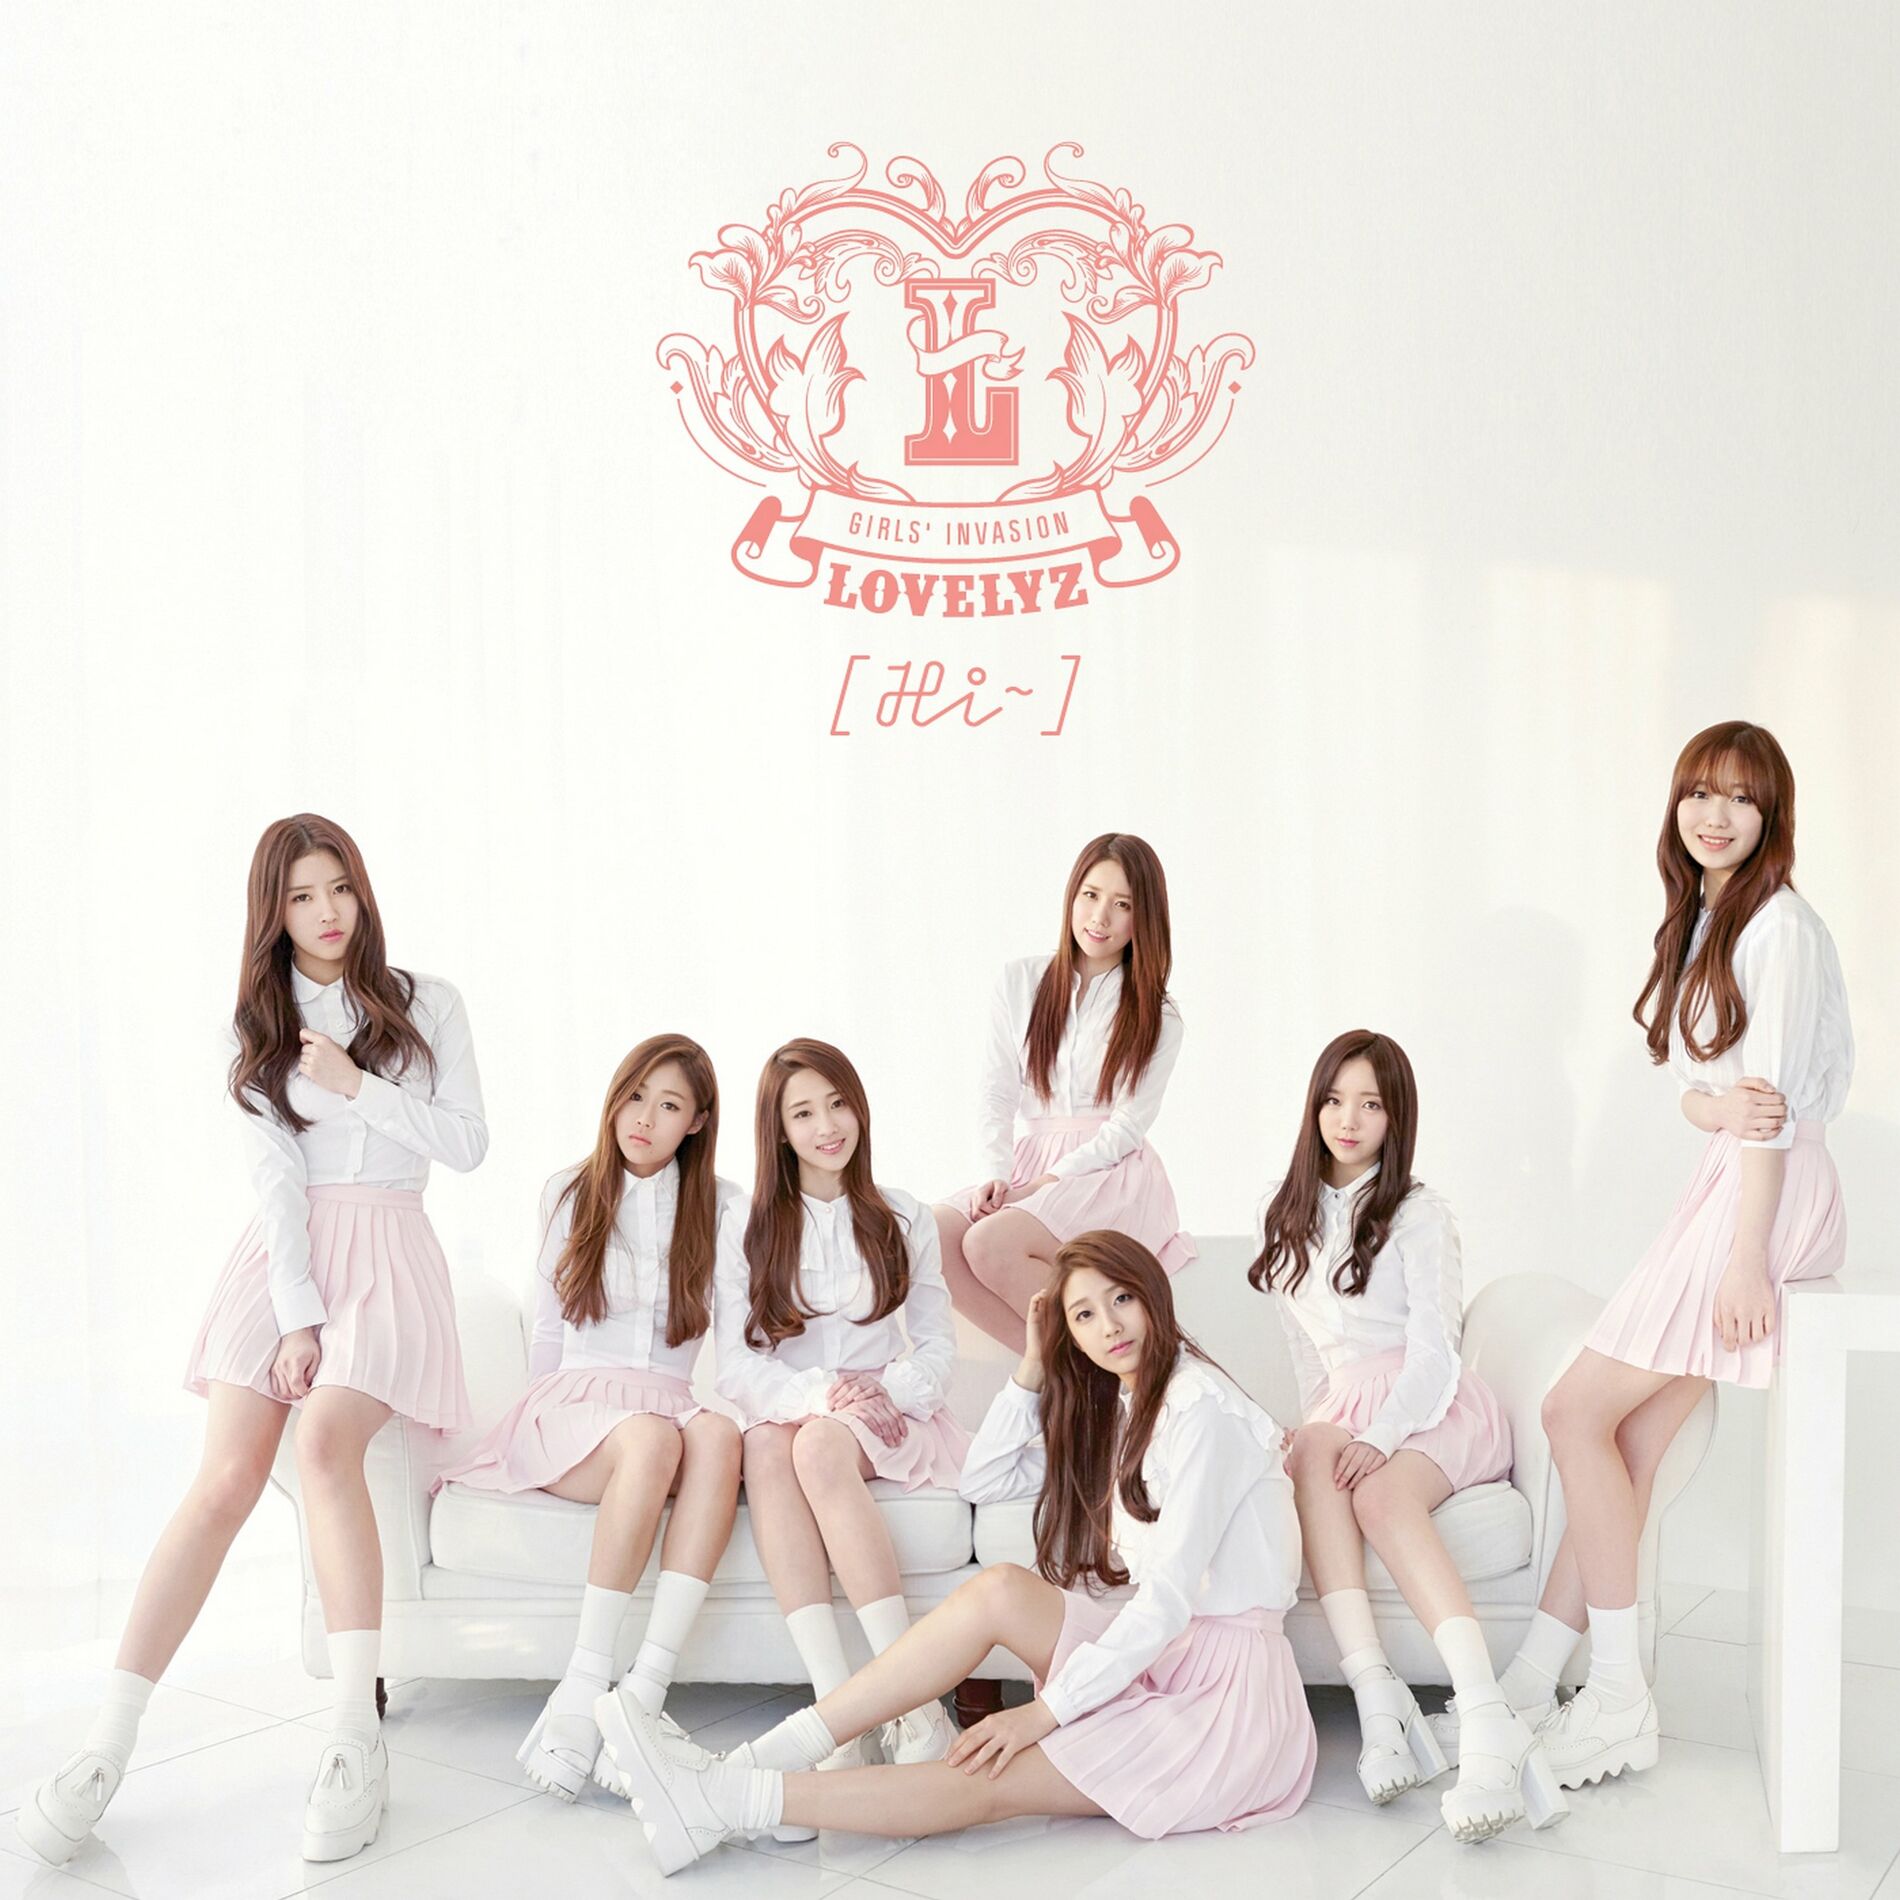 LOVELYZ (ラブリーズ)　4種類4枚ポスターセット　ロブリズ　K-POP　Repackage　Once upon a time